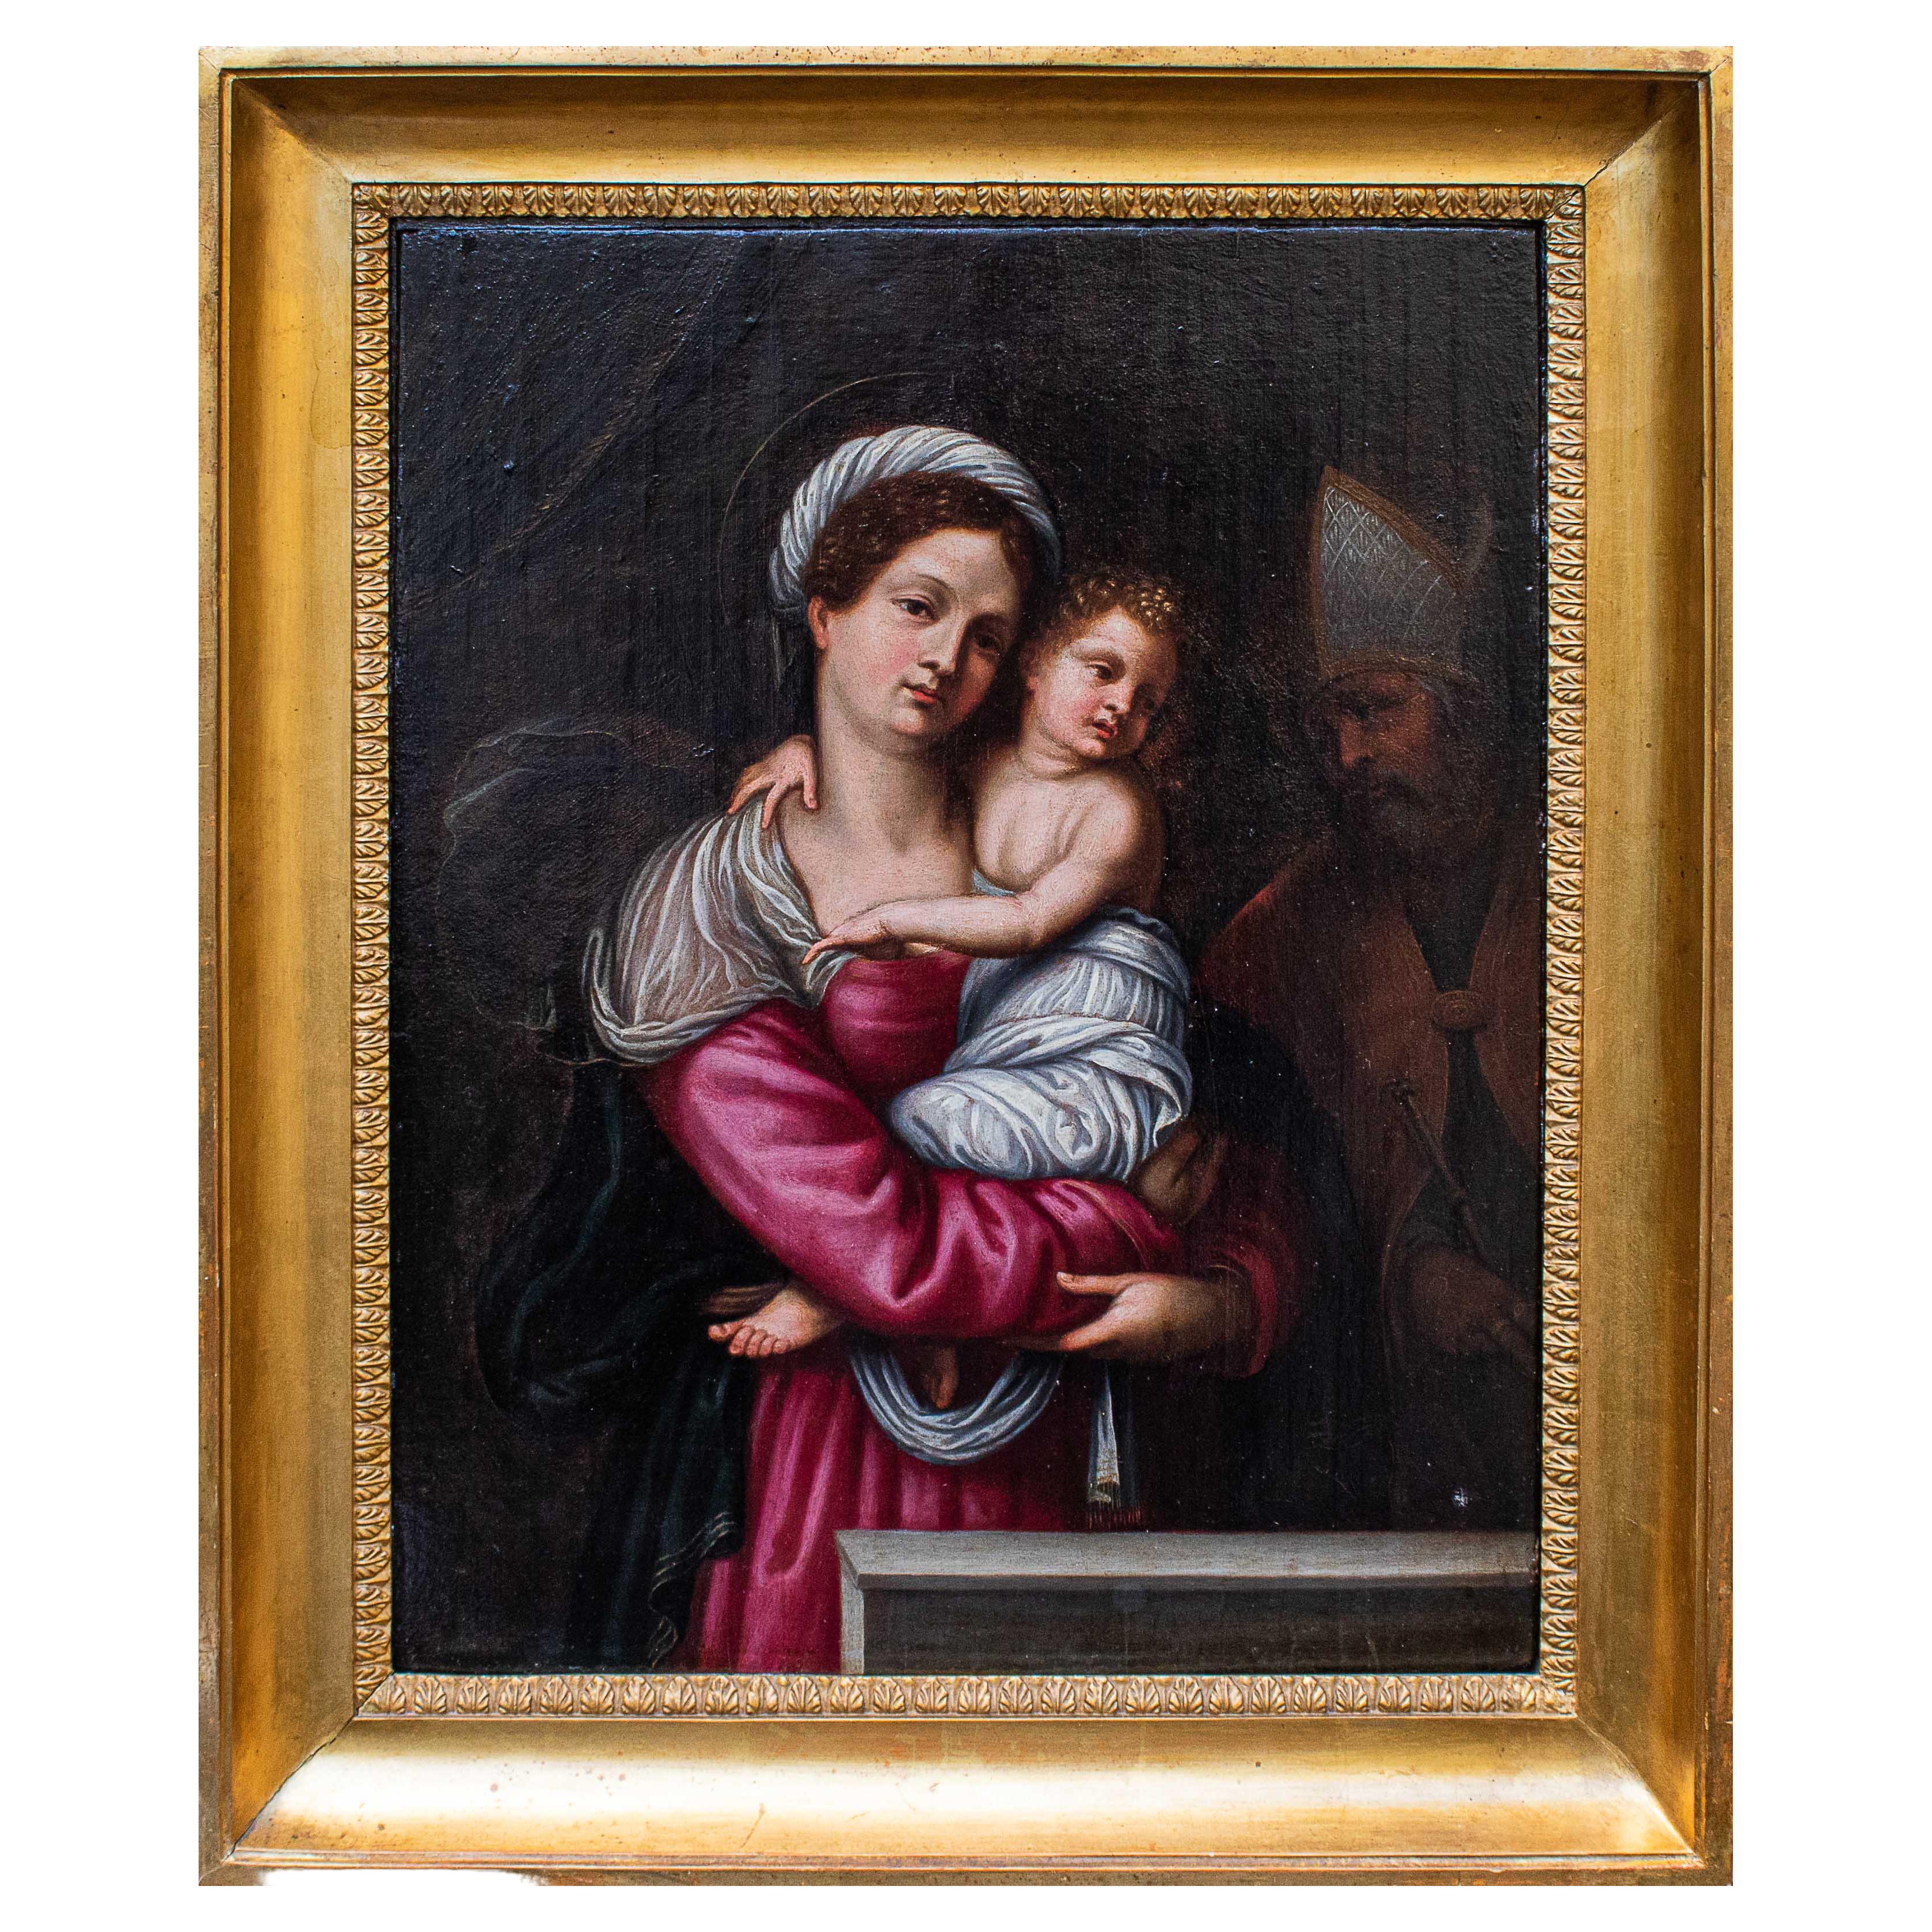 16th Century Madonna with Child and Holy Bishop Painting Oil on Panel